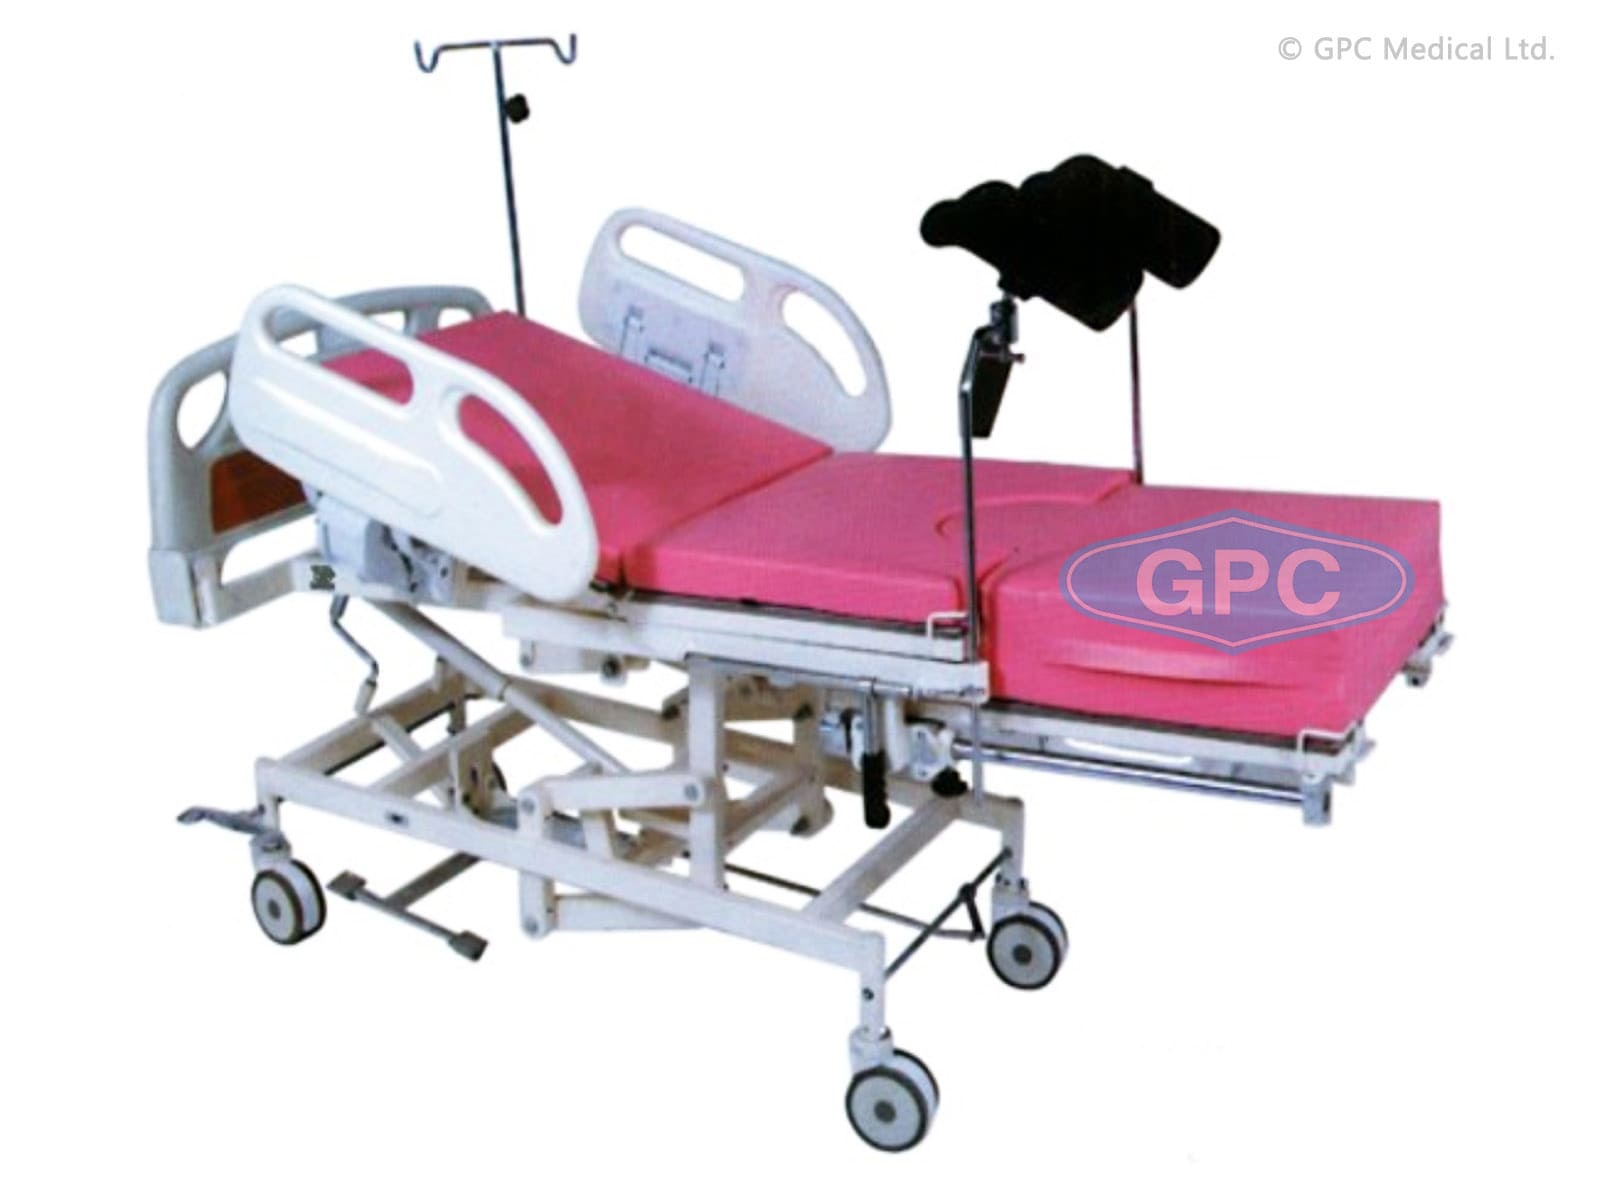 Delivery Bed – Hydraulic